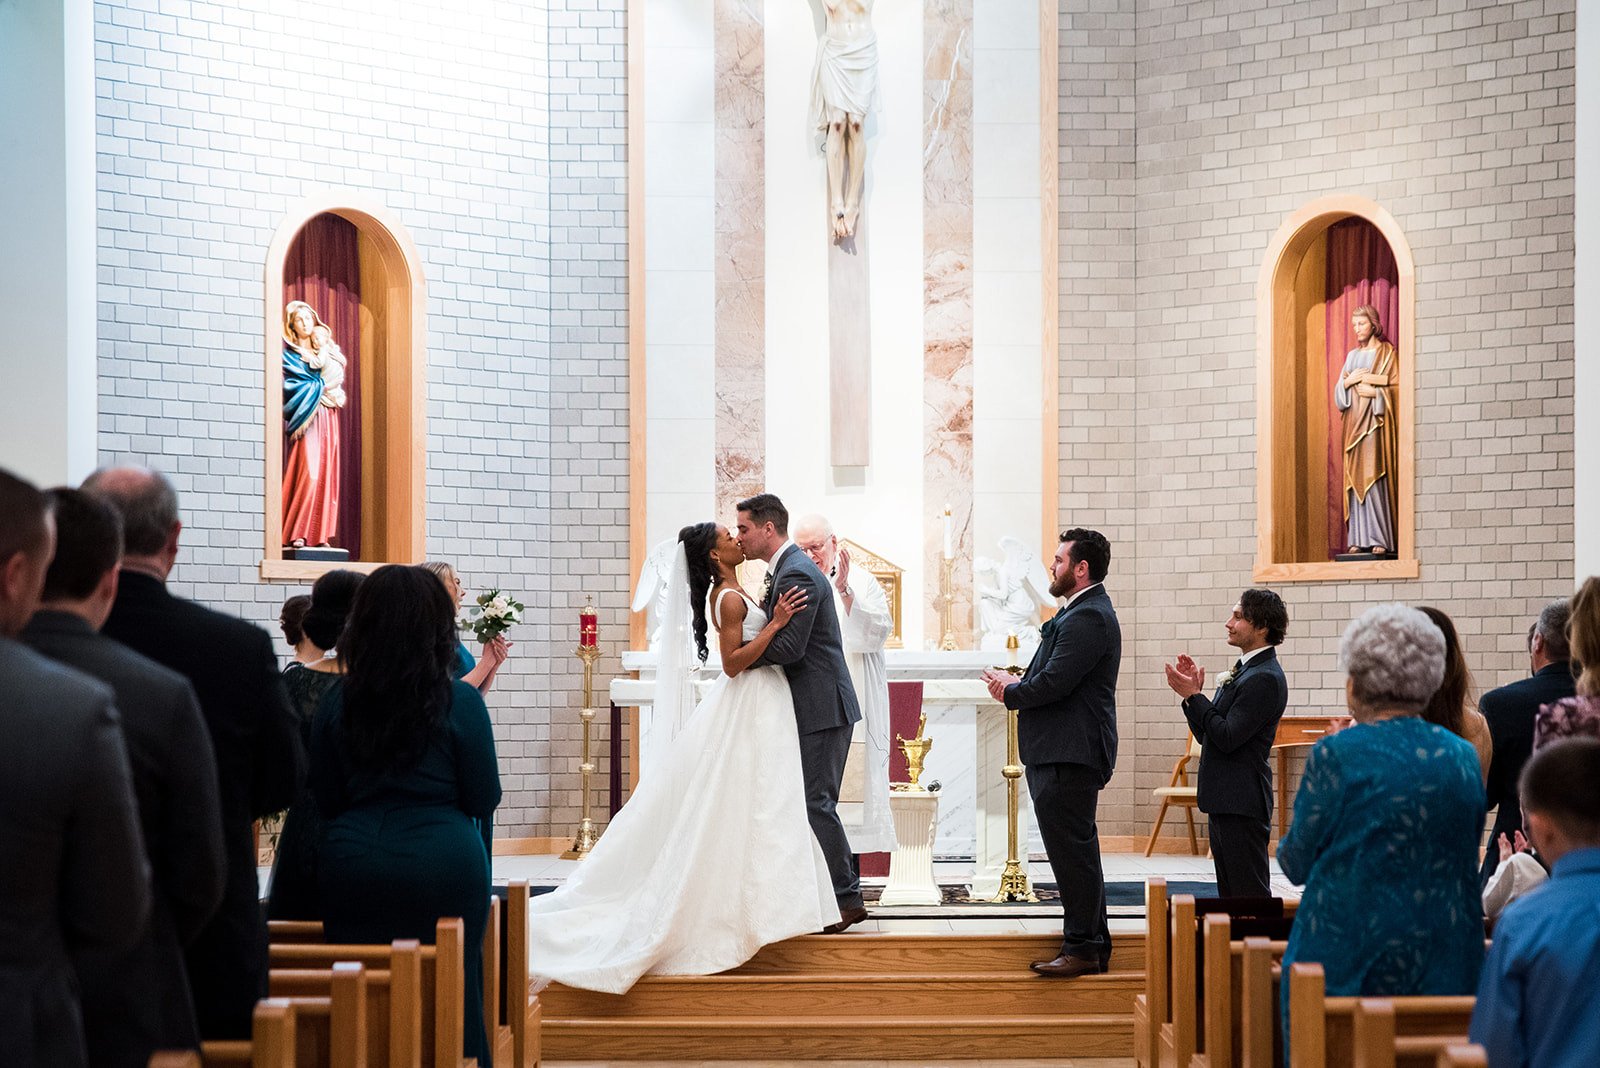 Bride and groom share their first kiss on the church alter after the ceremony.